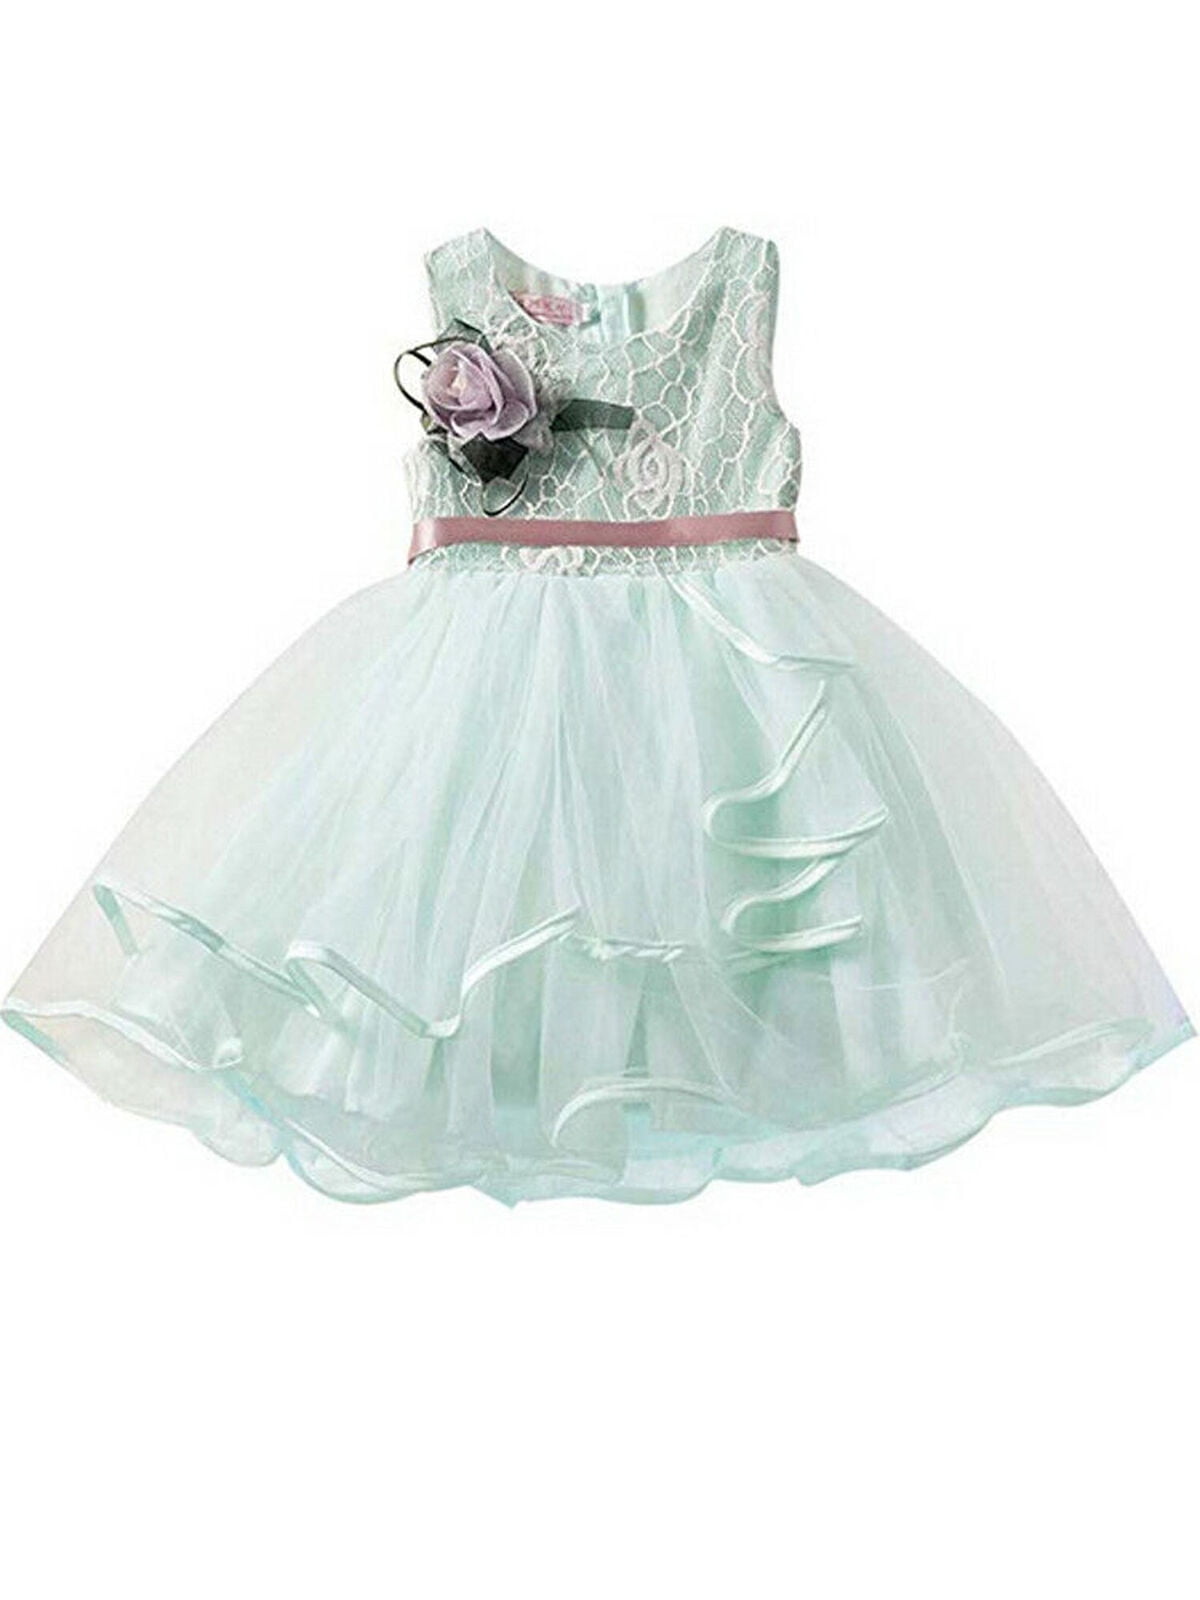 Toddler Kids Baby Girls Floral Princess Dress Party Pageant Lace Tutu Dresses 